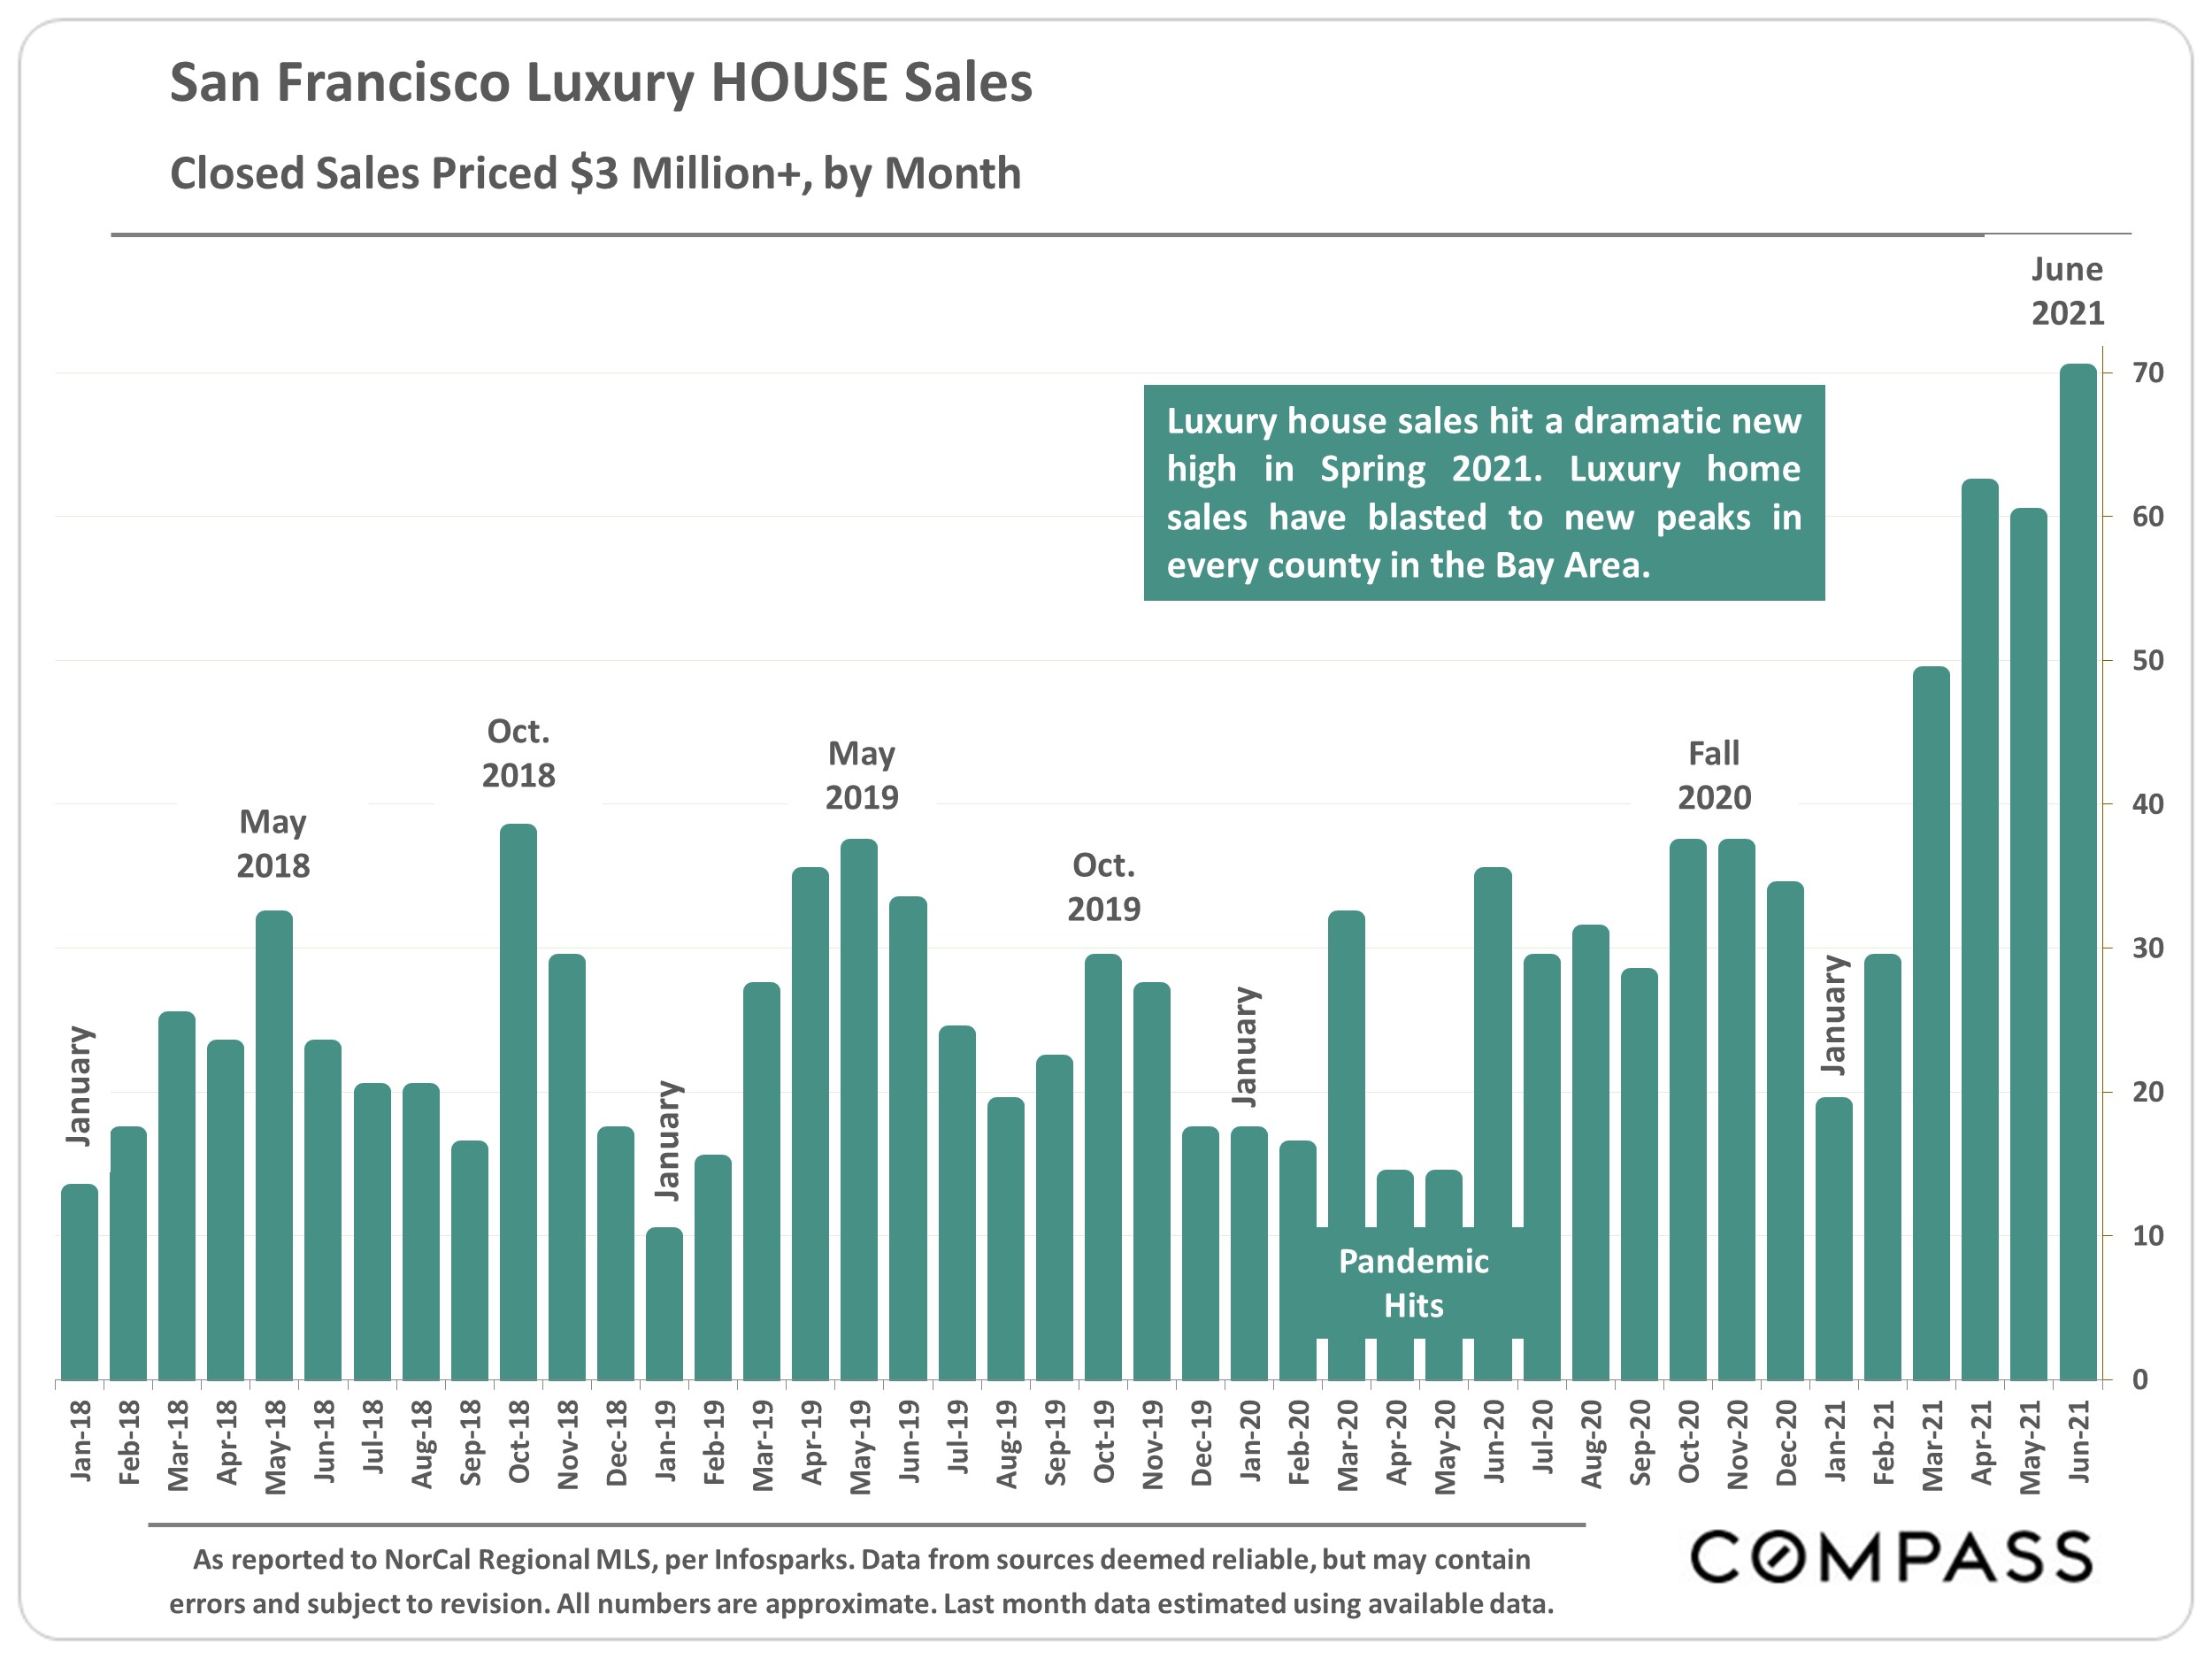 Graph showing San Francisco Luxury House Sales, Closed Sales Priced $3 Million+, by month, from Jan 2018 to Jun 2021